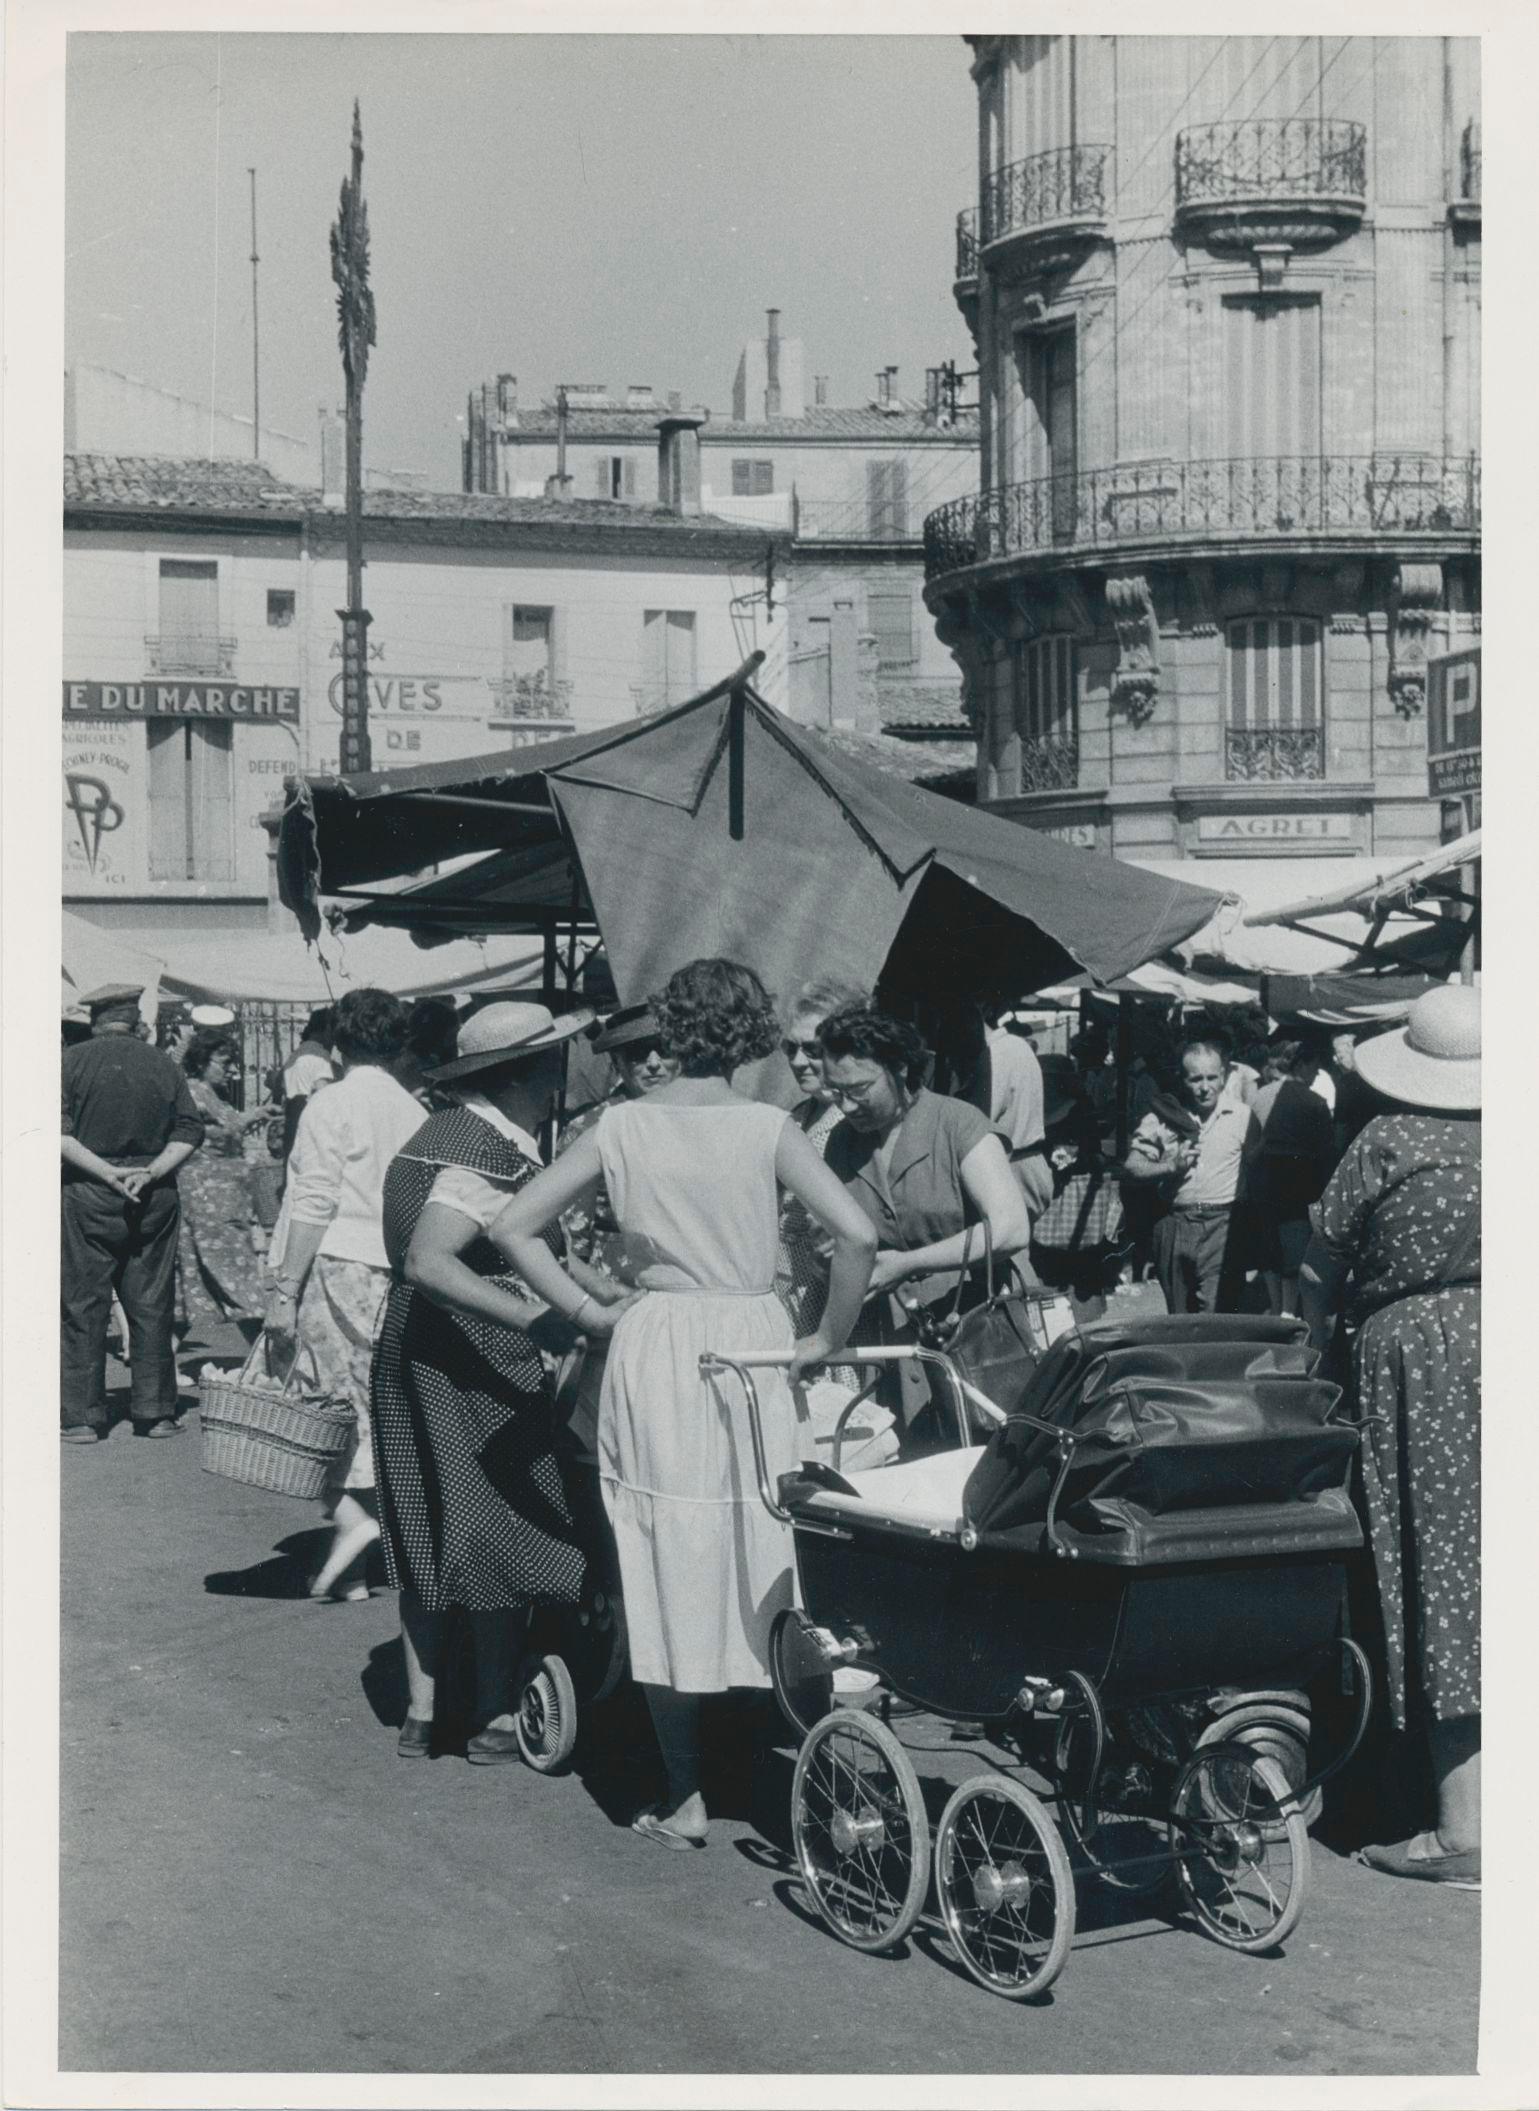 Erich Andres Black and White Photograph - Women, Market, Street Photography, Black and White, Italy 1950s, 17, 8 x 13 cm